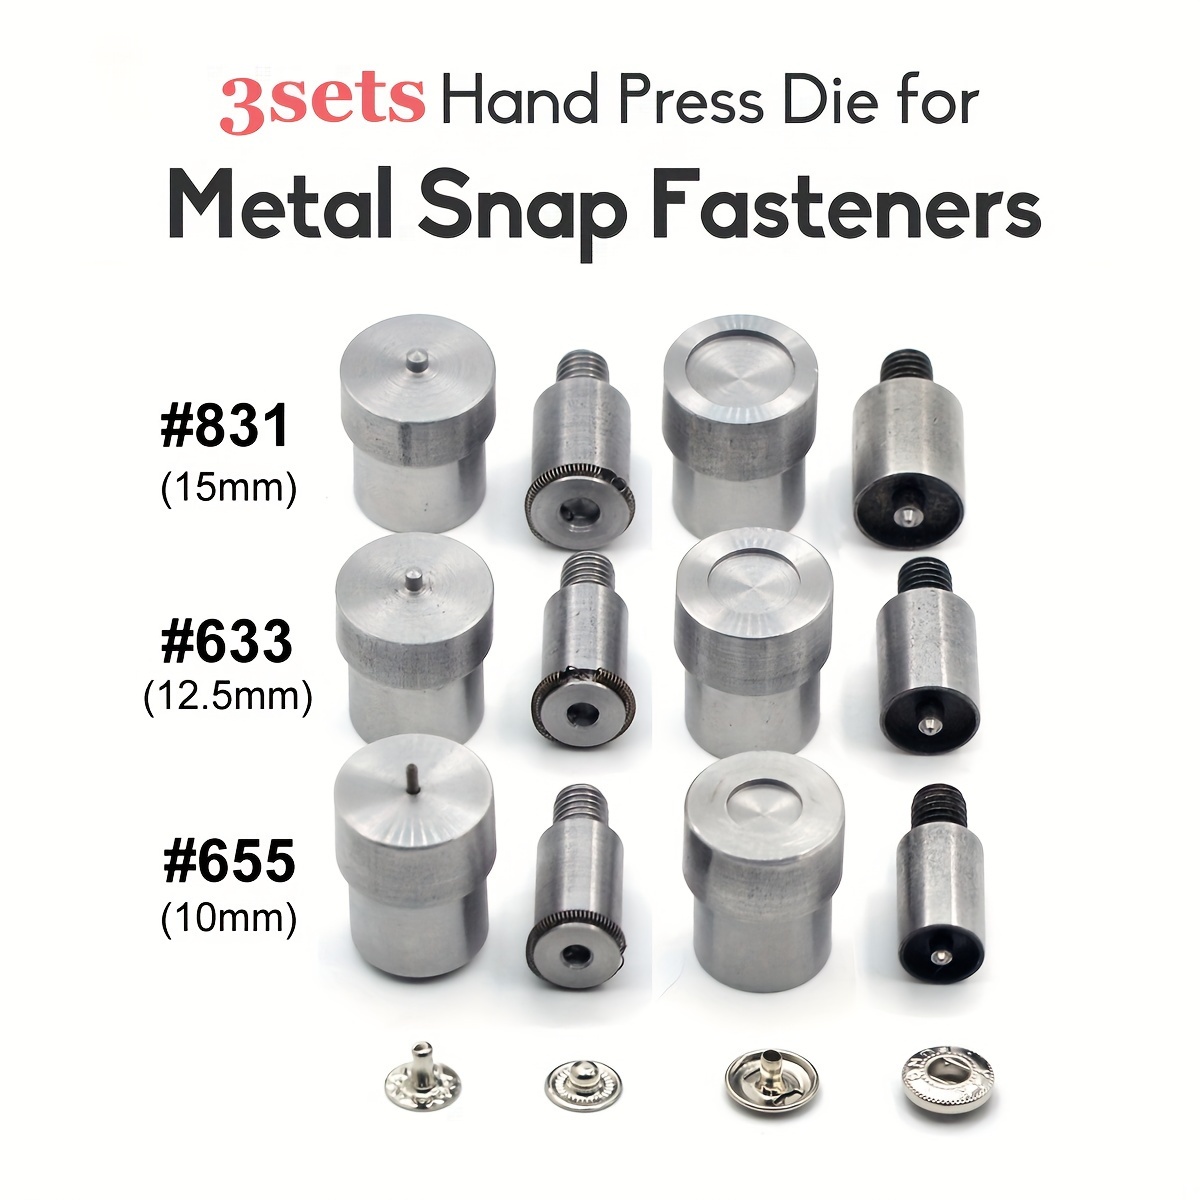 

Stainless Steel Snap Button Die Set, 3-piece With 4 Pieces - Heavy Duty Press Fastener Tool For Hand Press Machines, Compatible With 651/633/831 Buttons, No-sew Clothing & Leather Crafting